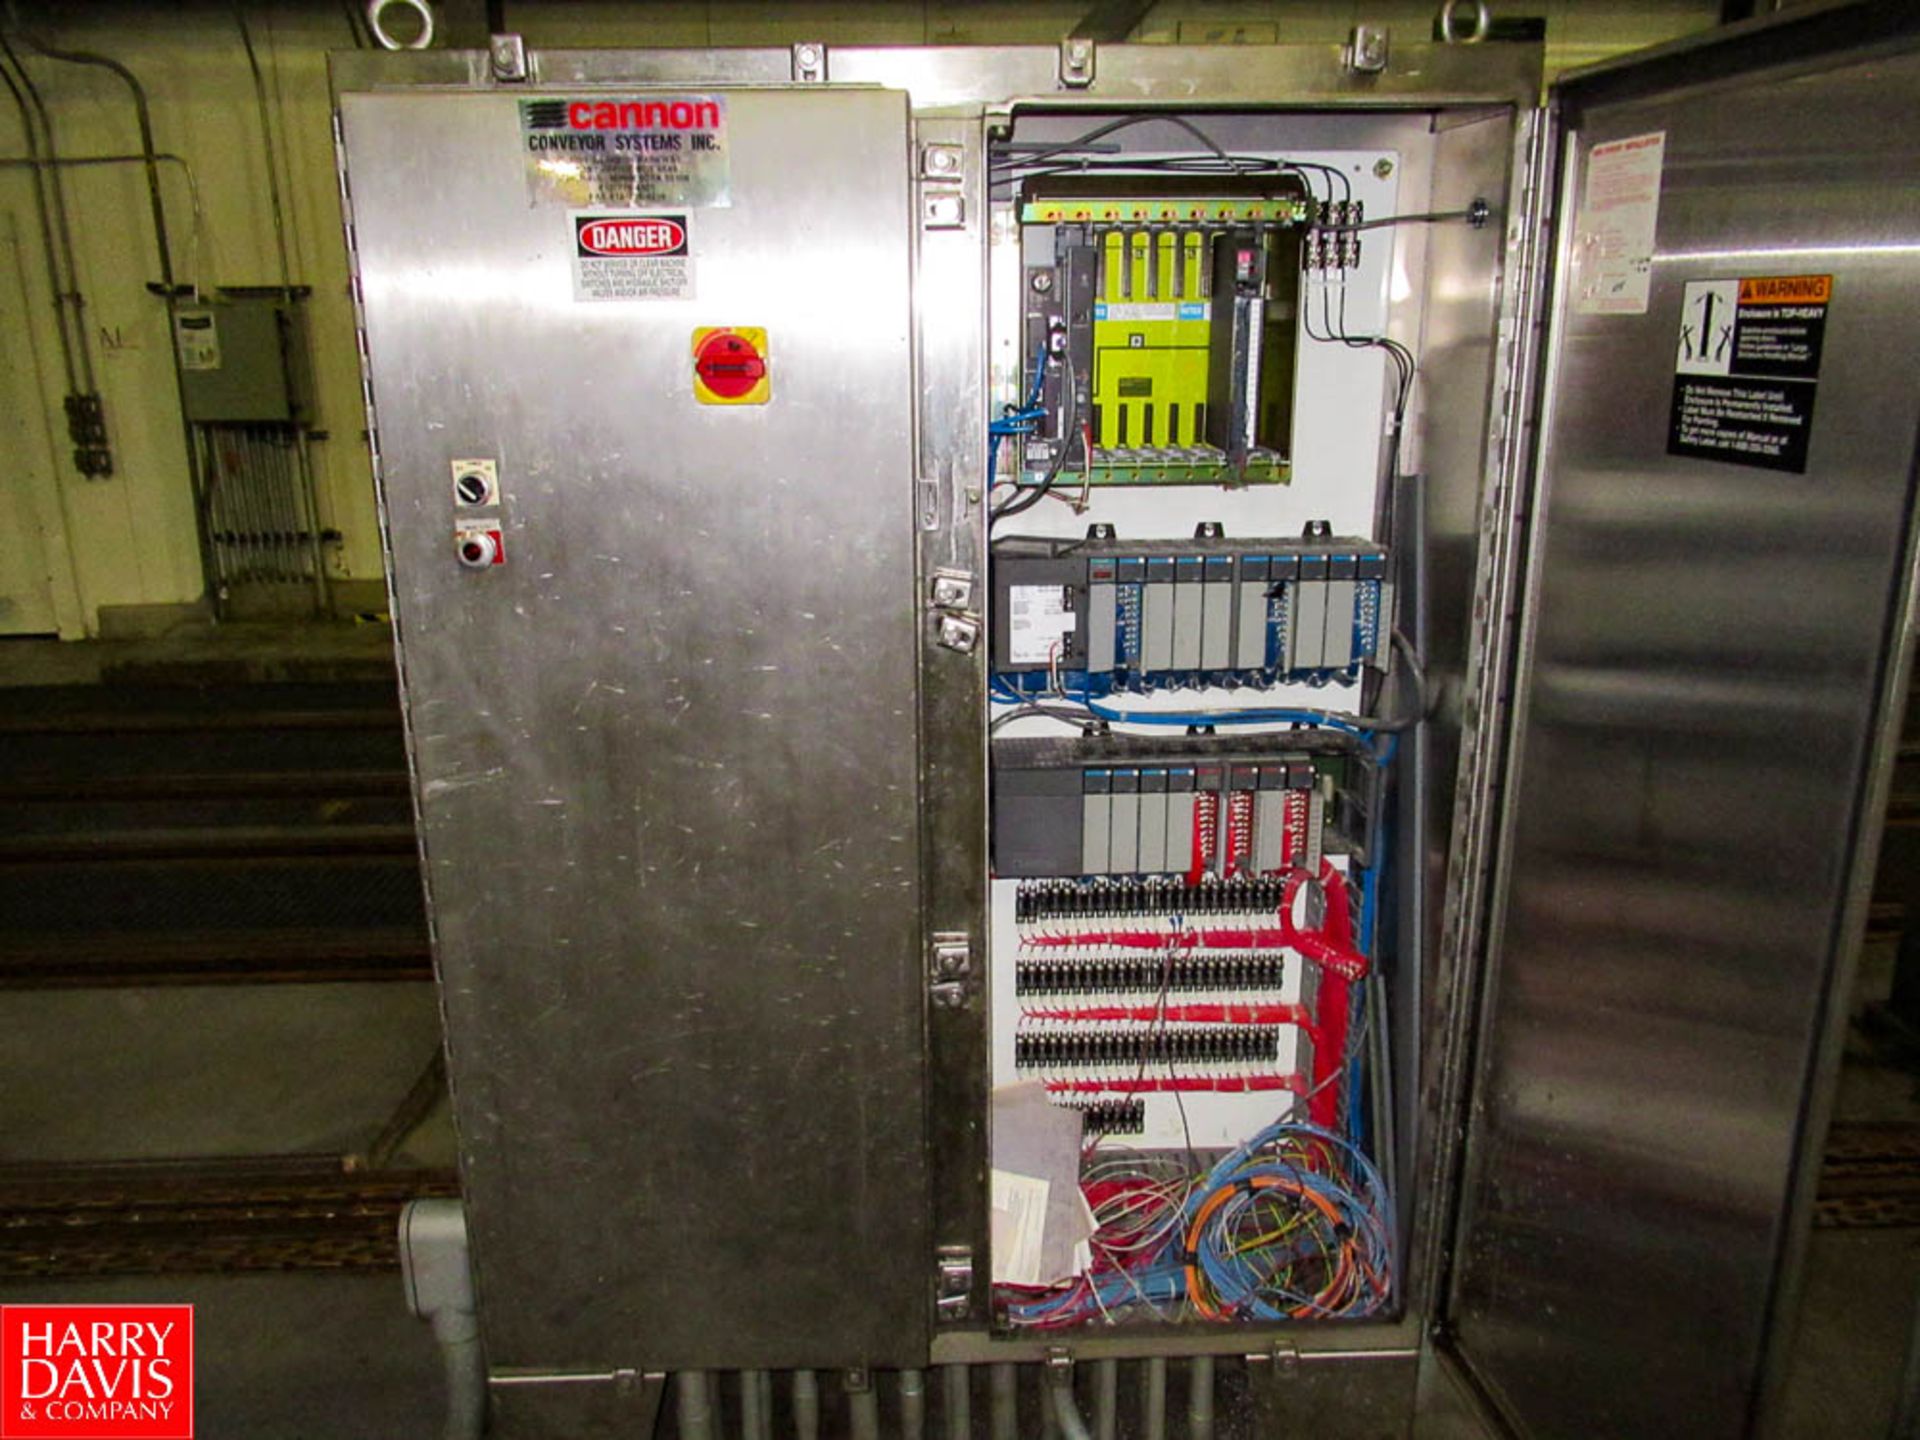 Lot of (2) Cannon PLC Control Cabinets Includes MCC Panel 8, Located In: Storage Cooler A - - Image 2 of 4